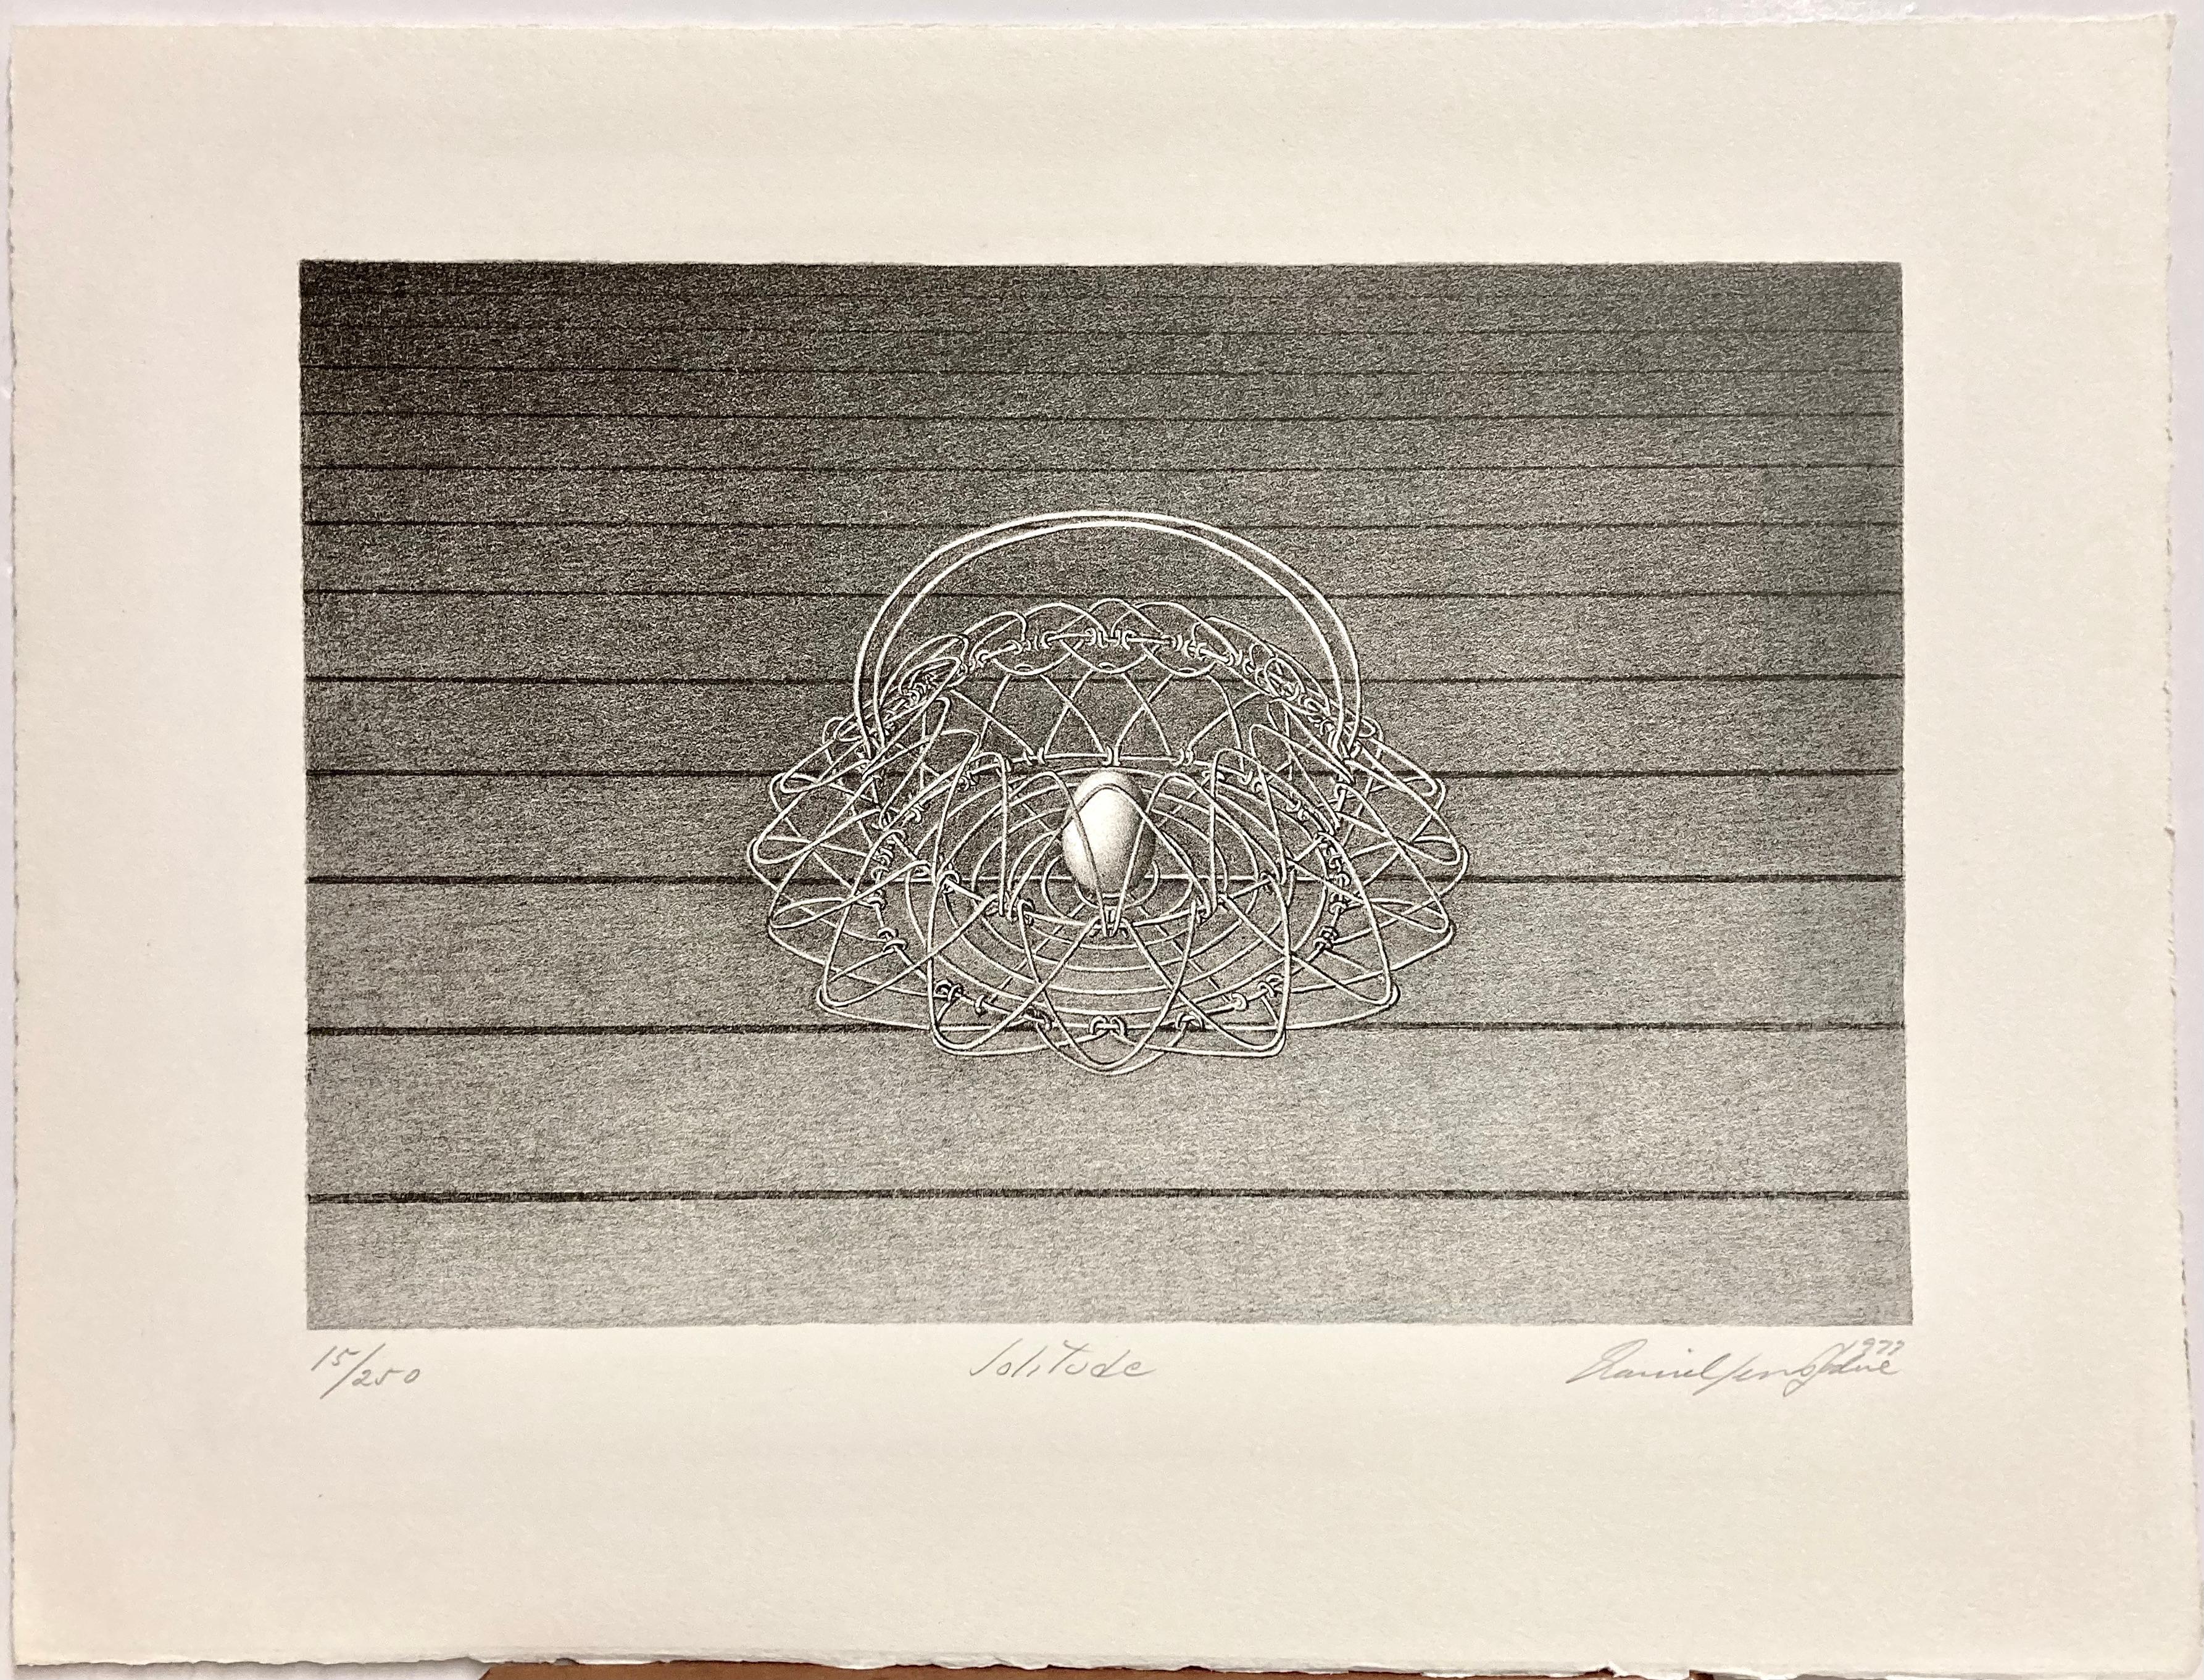 Daniel Serra-Badue was a Cuban artist working in New York City. His work is notable not only for the surrealist subject matter (a single egg in a wire basket in deep space) but for the extremely skillful work on the lithographic stone. NO ONE else